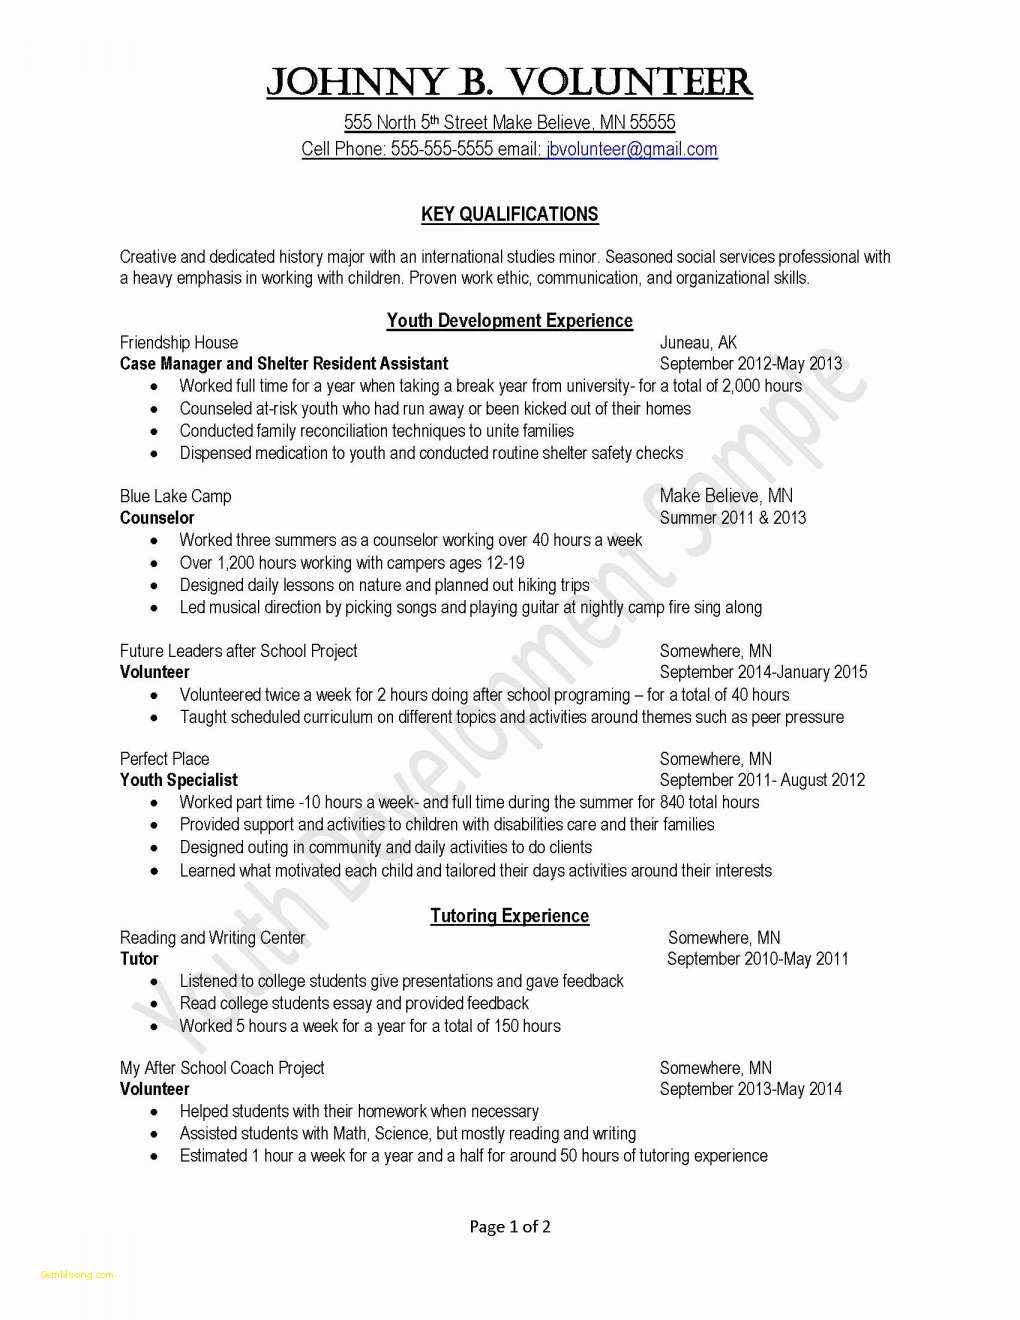 Community Service Letter Template for Students - Free Resume Templates for Students Takenosumi